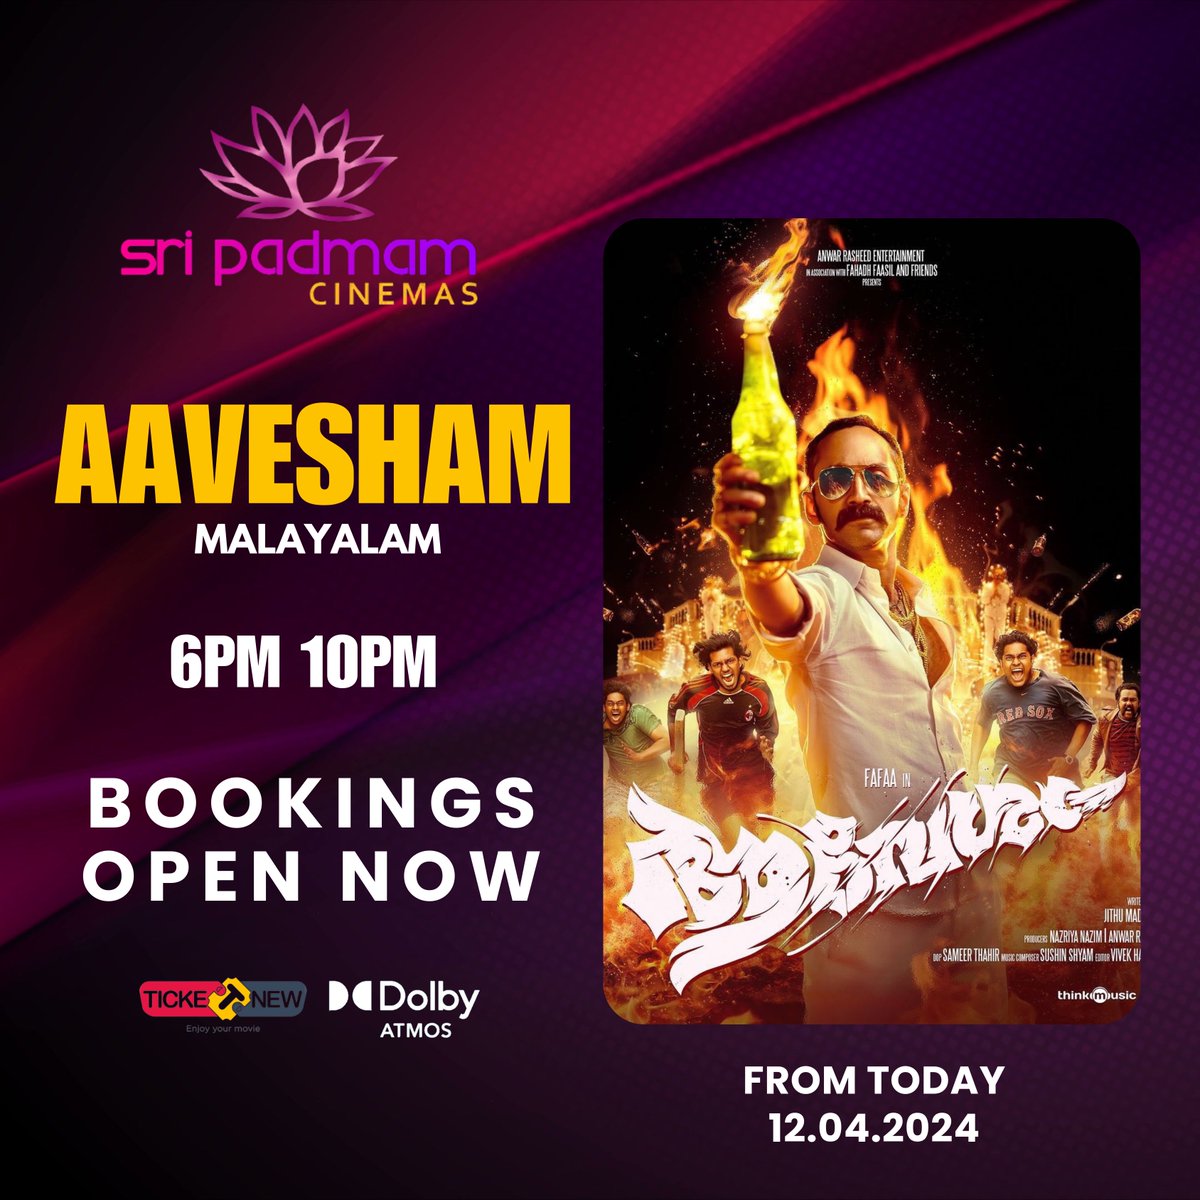 As per audience request we are screening #Aavesham from today at #SriPadmamCinemas Tenkasi

Book your tickets now on Ticketnew 

#PssMultiplex #Tenkasi #Aavesham #MalayalamMovie